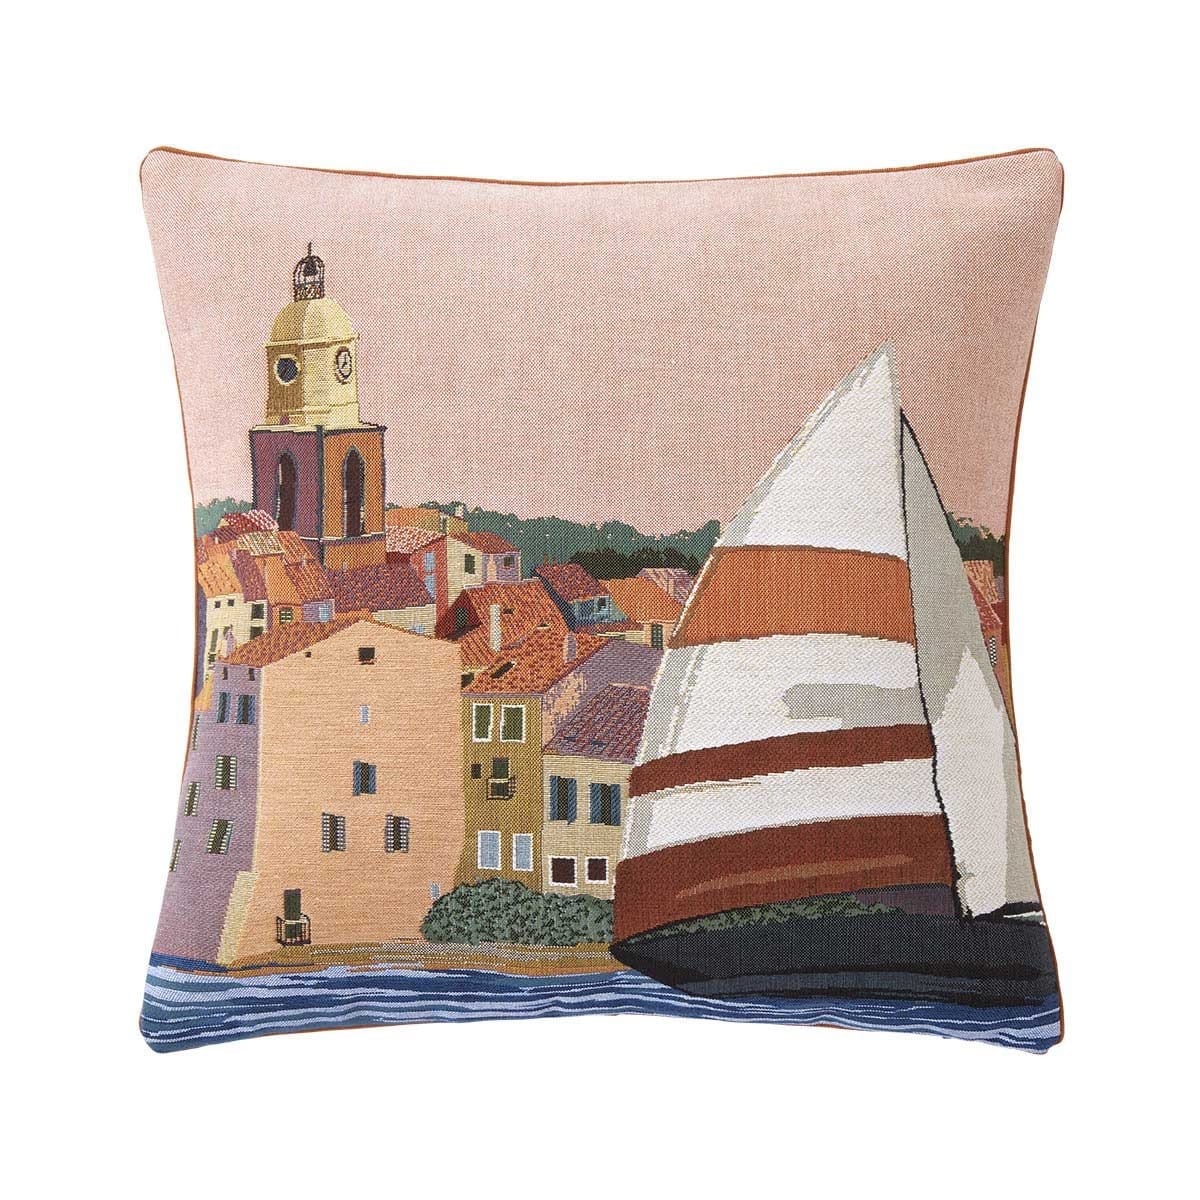 Decorative Pillows Iosis Cigales Decorative Pillow by Yves Delorme PecheV Yves Delorme